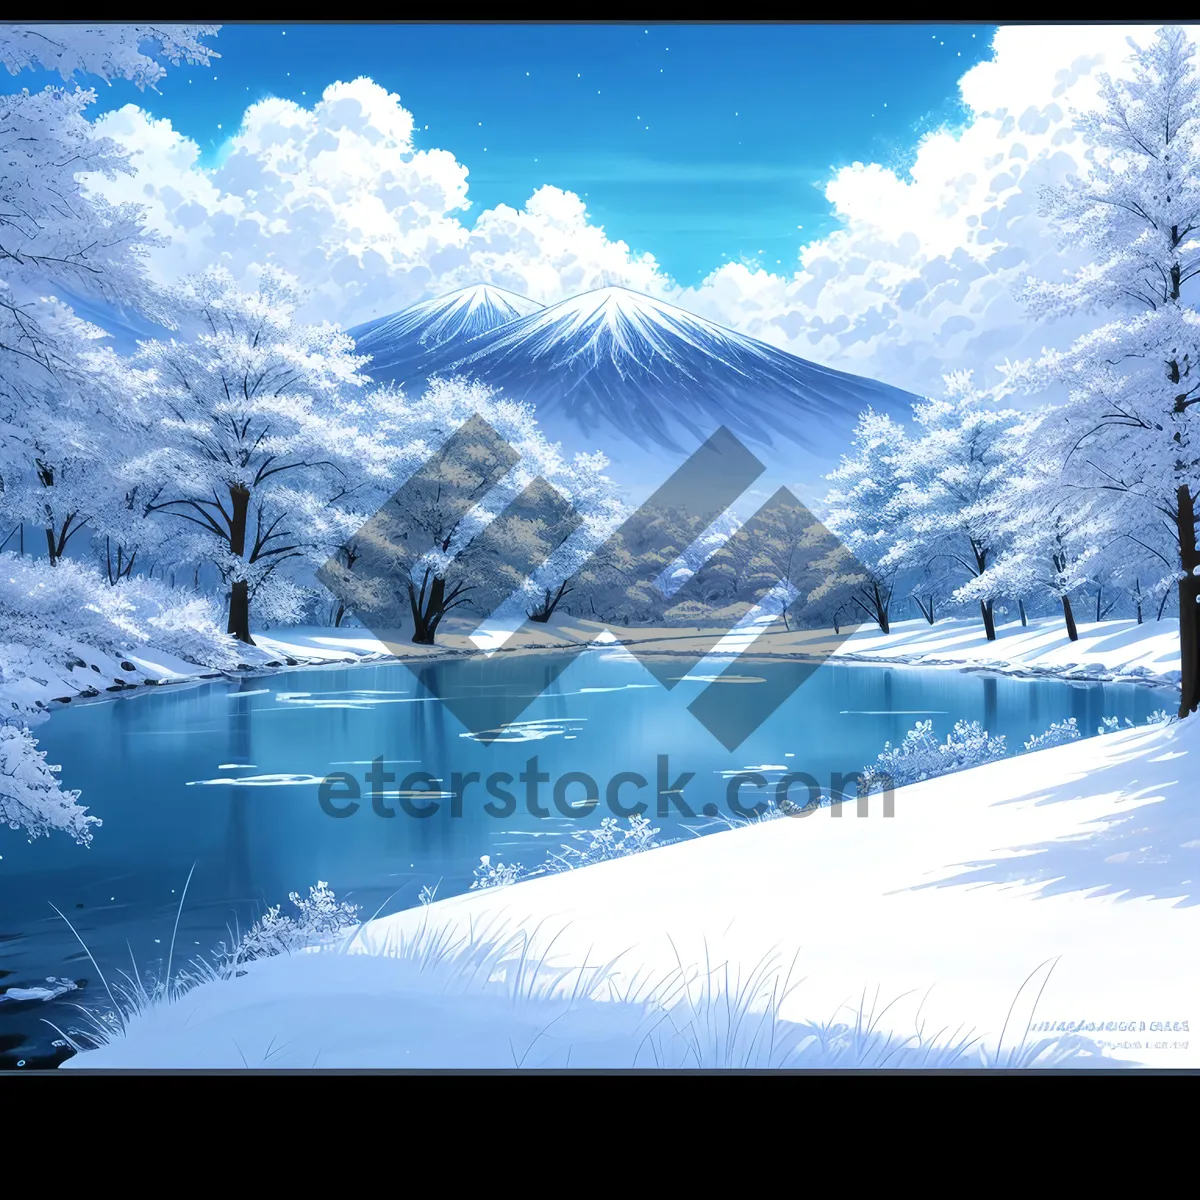 Picture of Snow-capped Alpine Mountains in Winter Wonderland